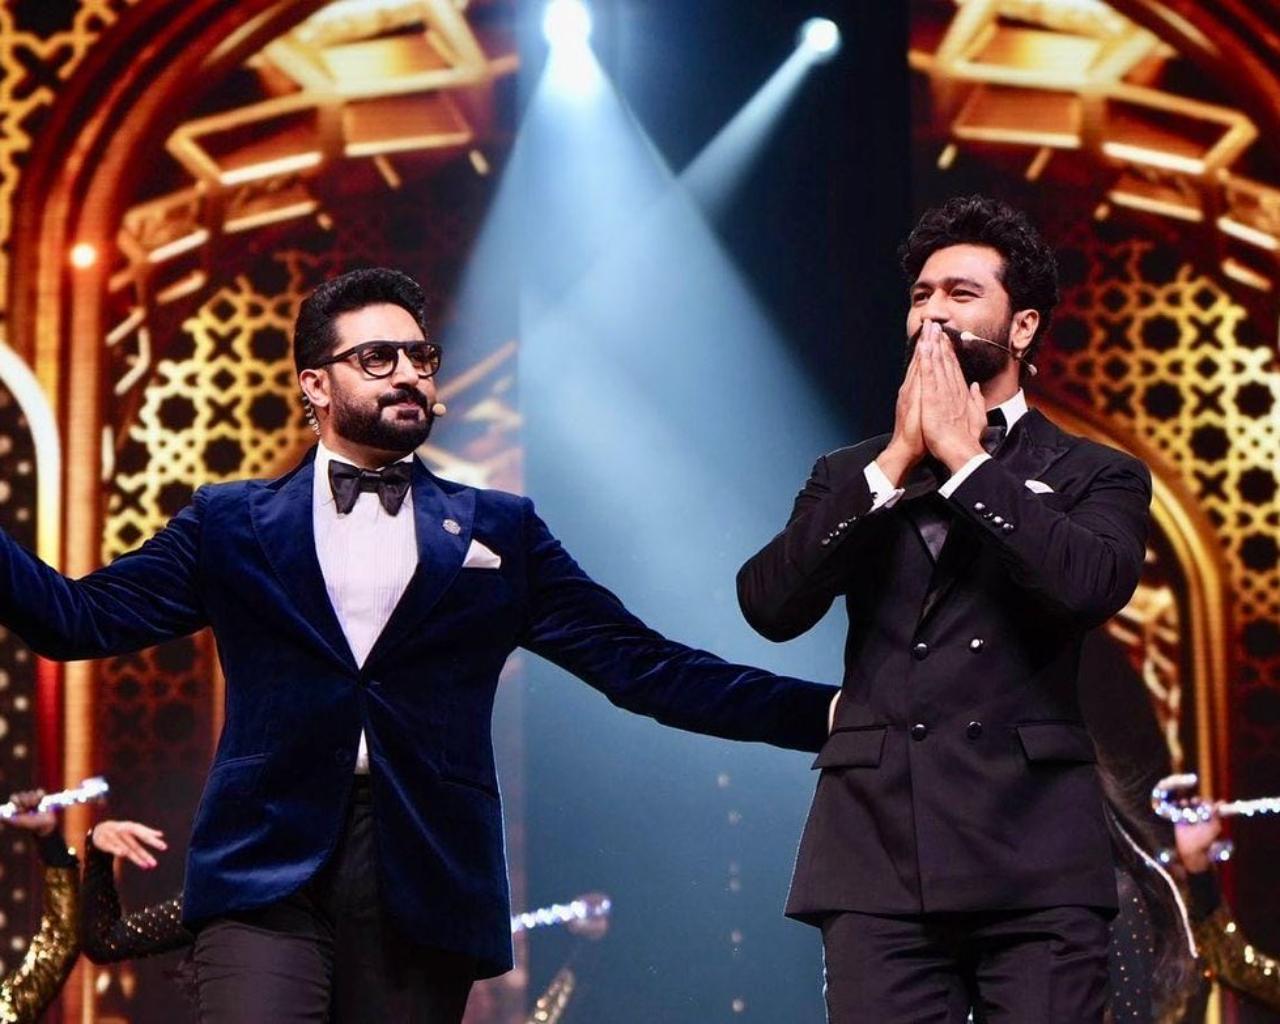 Vicky Kaushal and Abhishek Bachchan were the hosts for the main event and they did a splendid job of entertaining the audience and announcing the awards